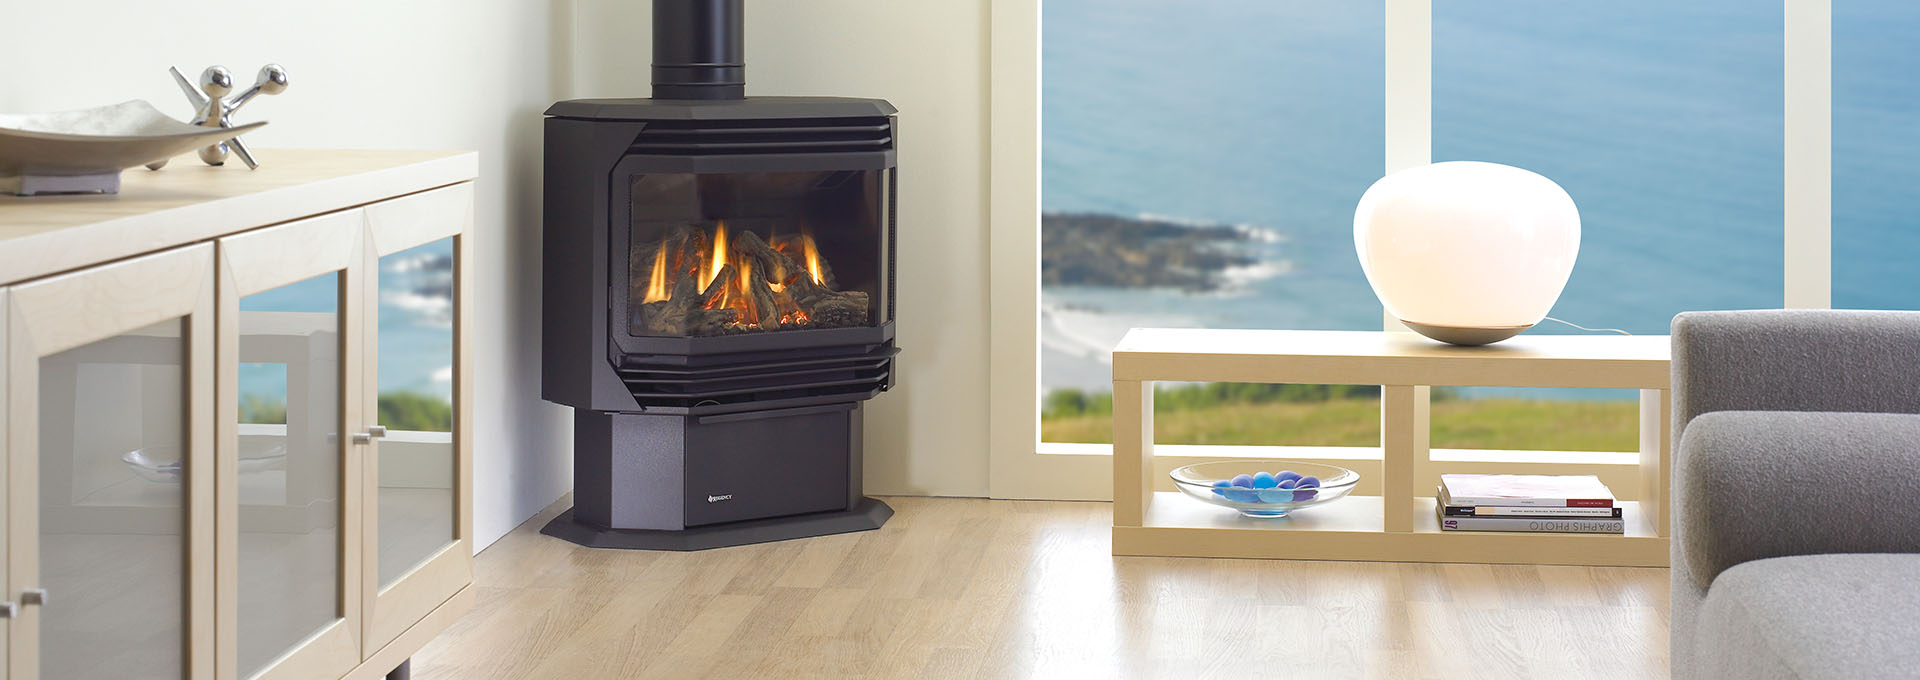 Regency is the leader in high-efficiency  gas stoves through attention to flame